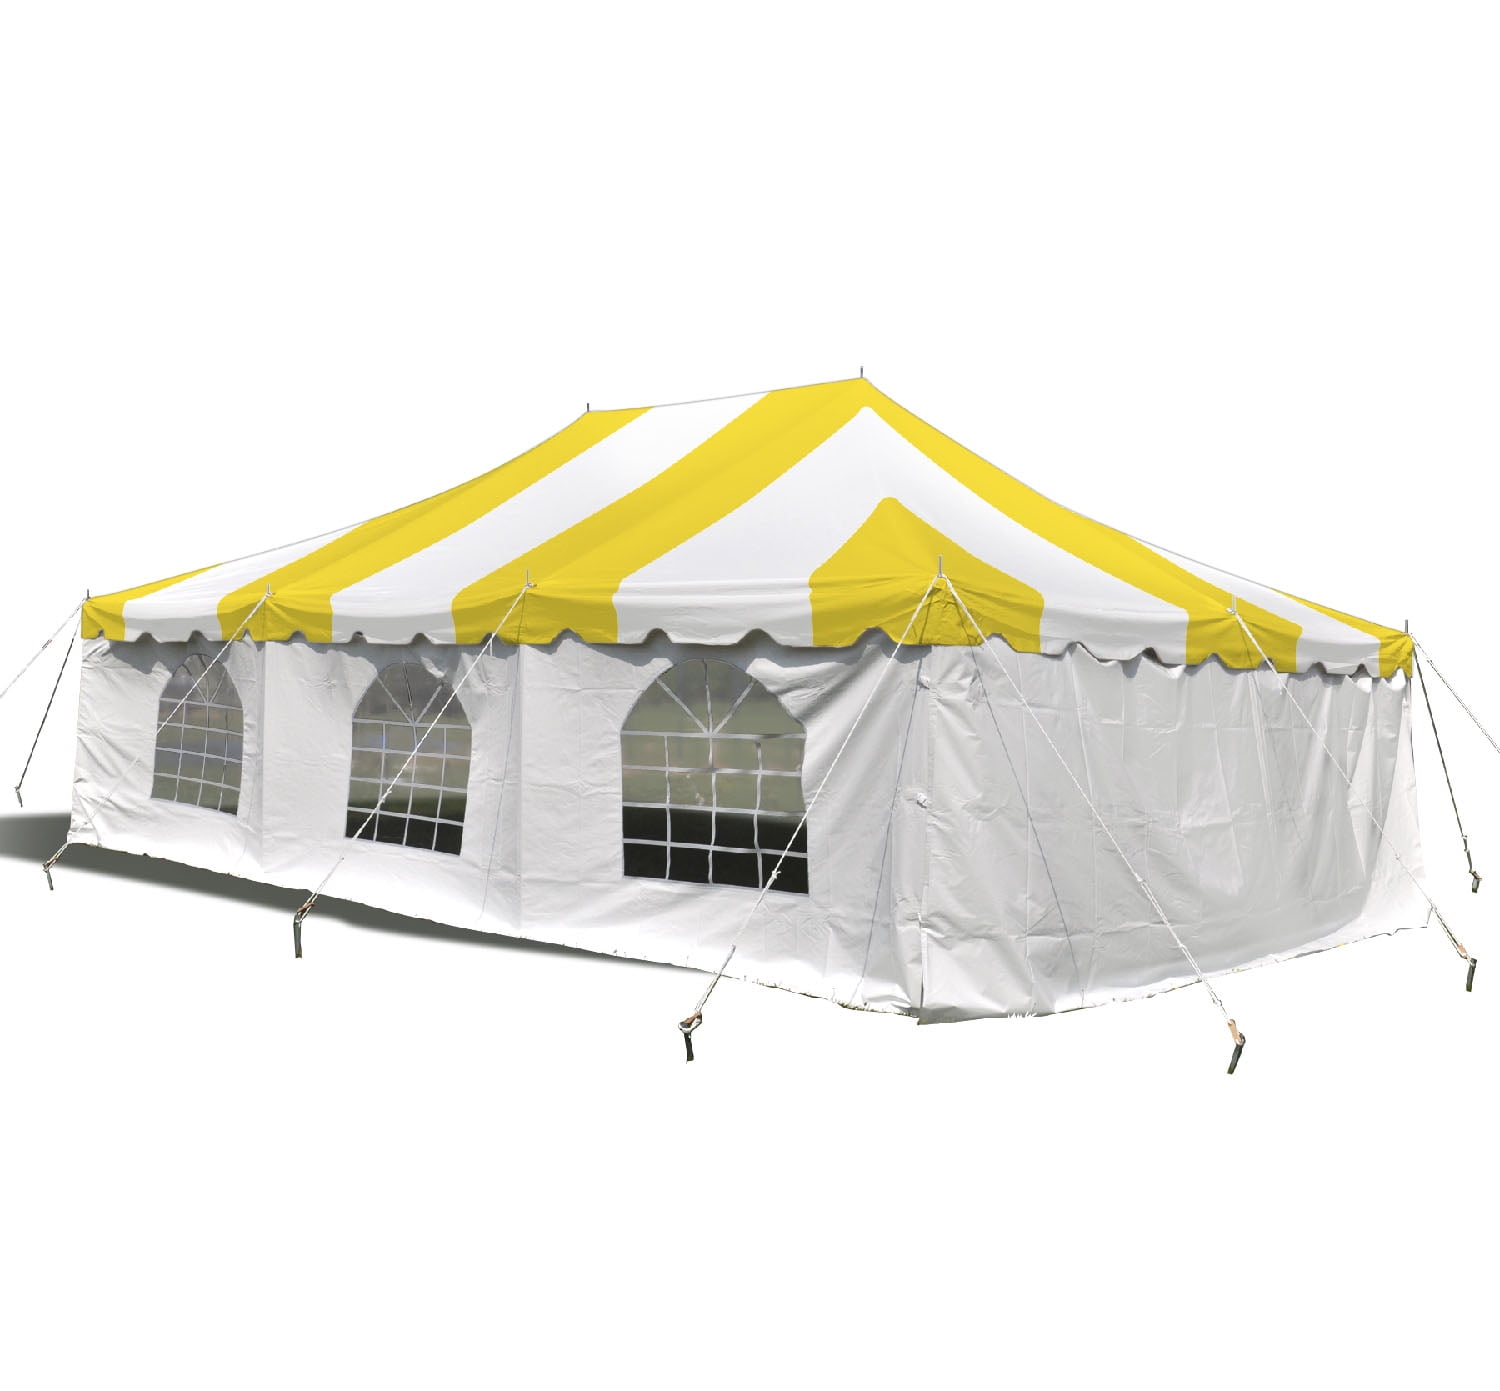 Pelsue Ground Tent, Yellow and White, 12' x 12' x 6.5'H, with Case